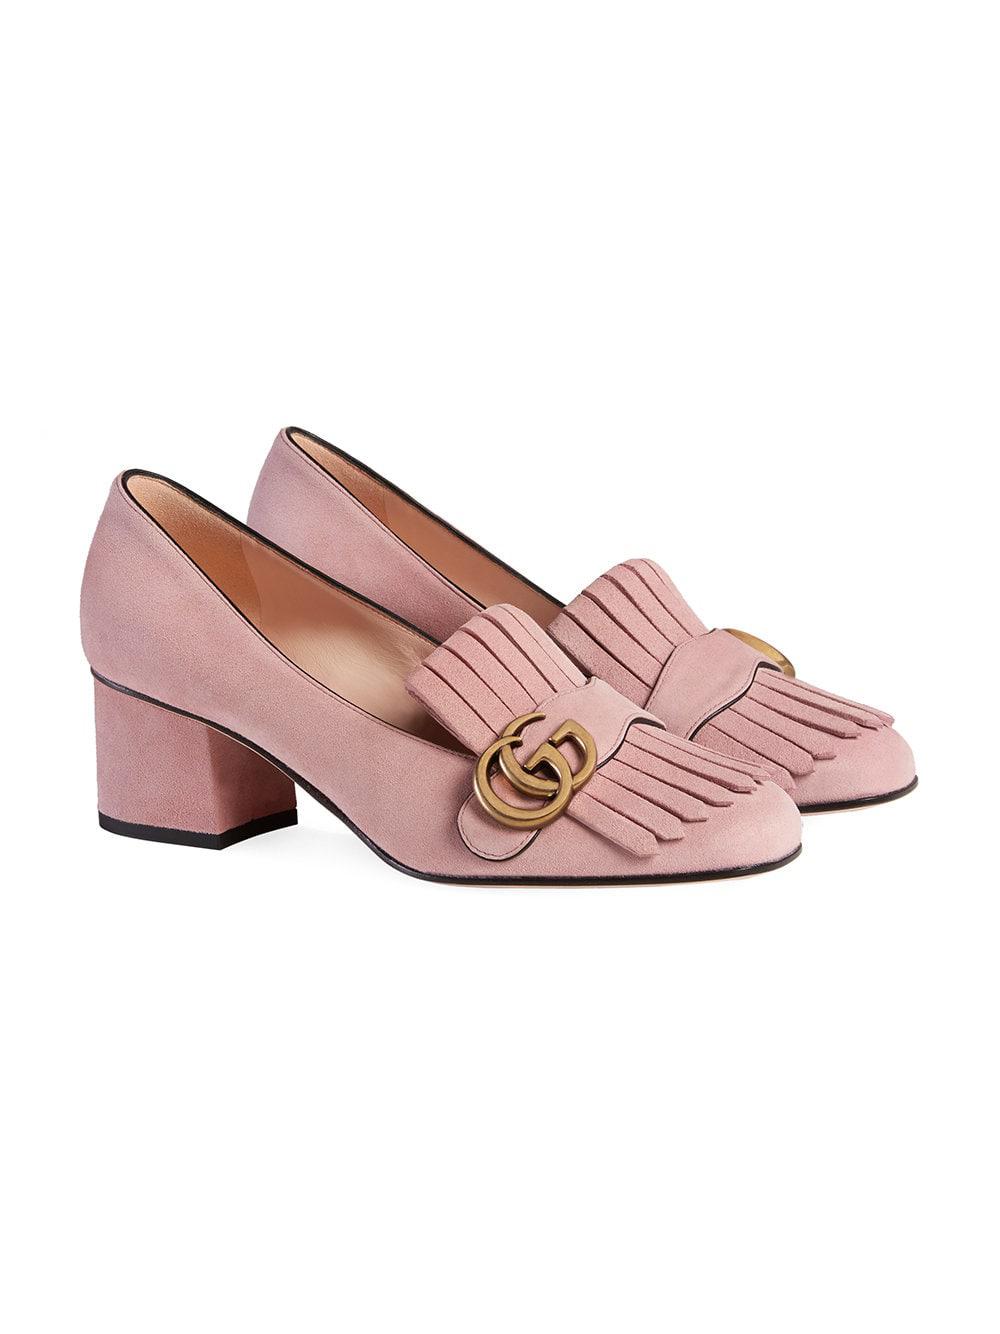 Fringed Suede Pumps in Light Pink Suede 